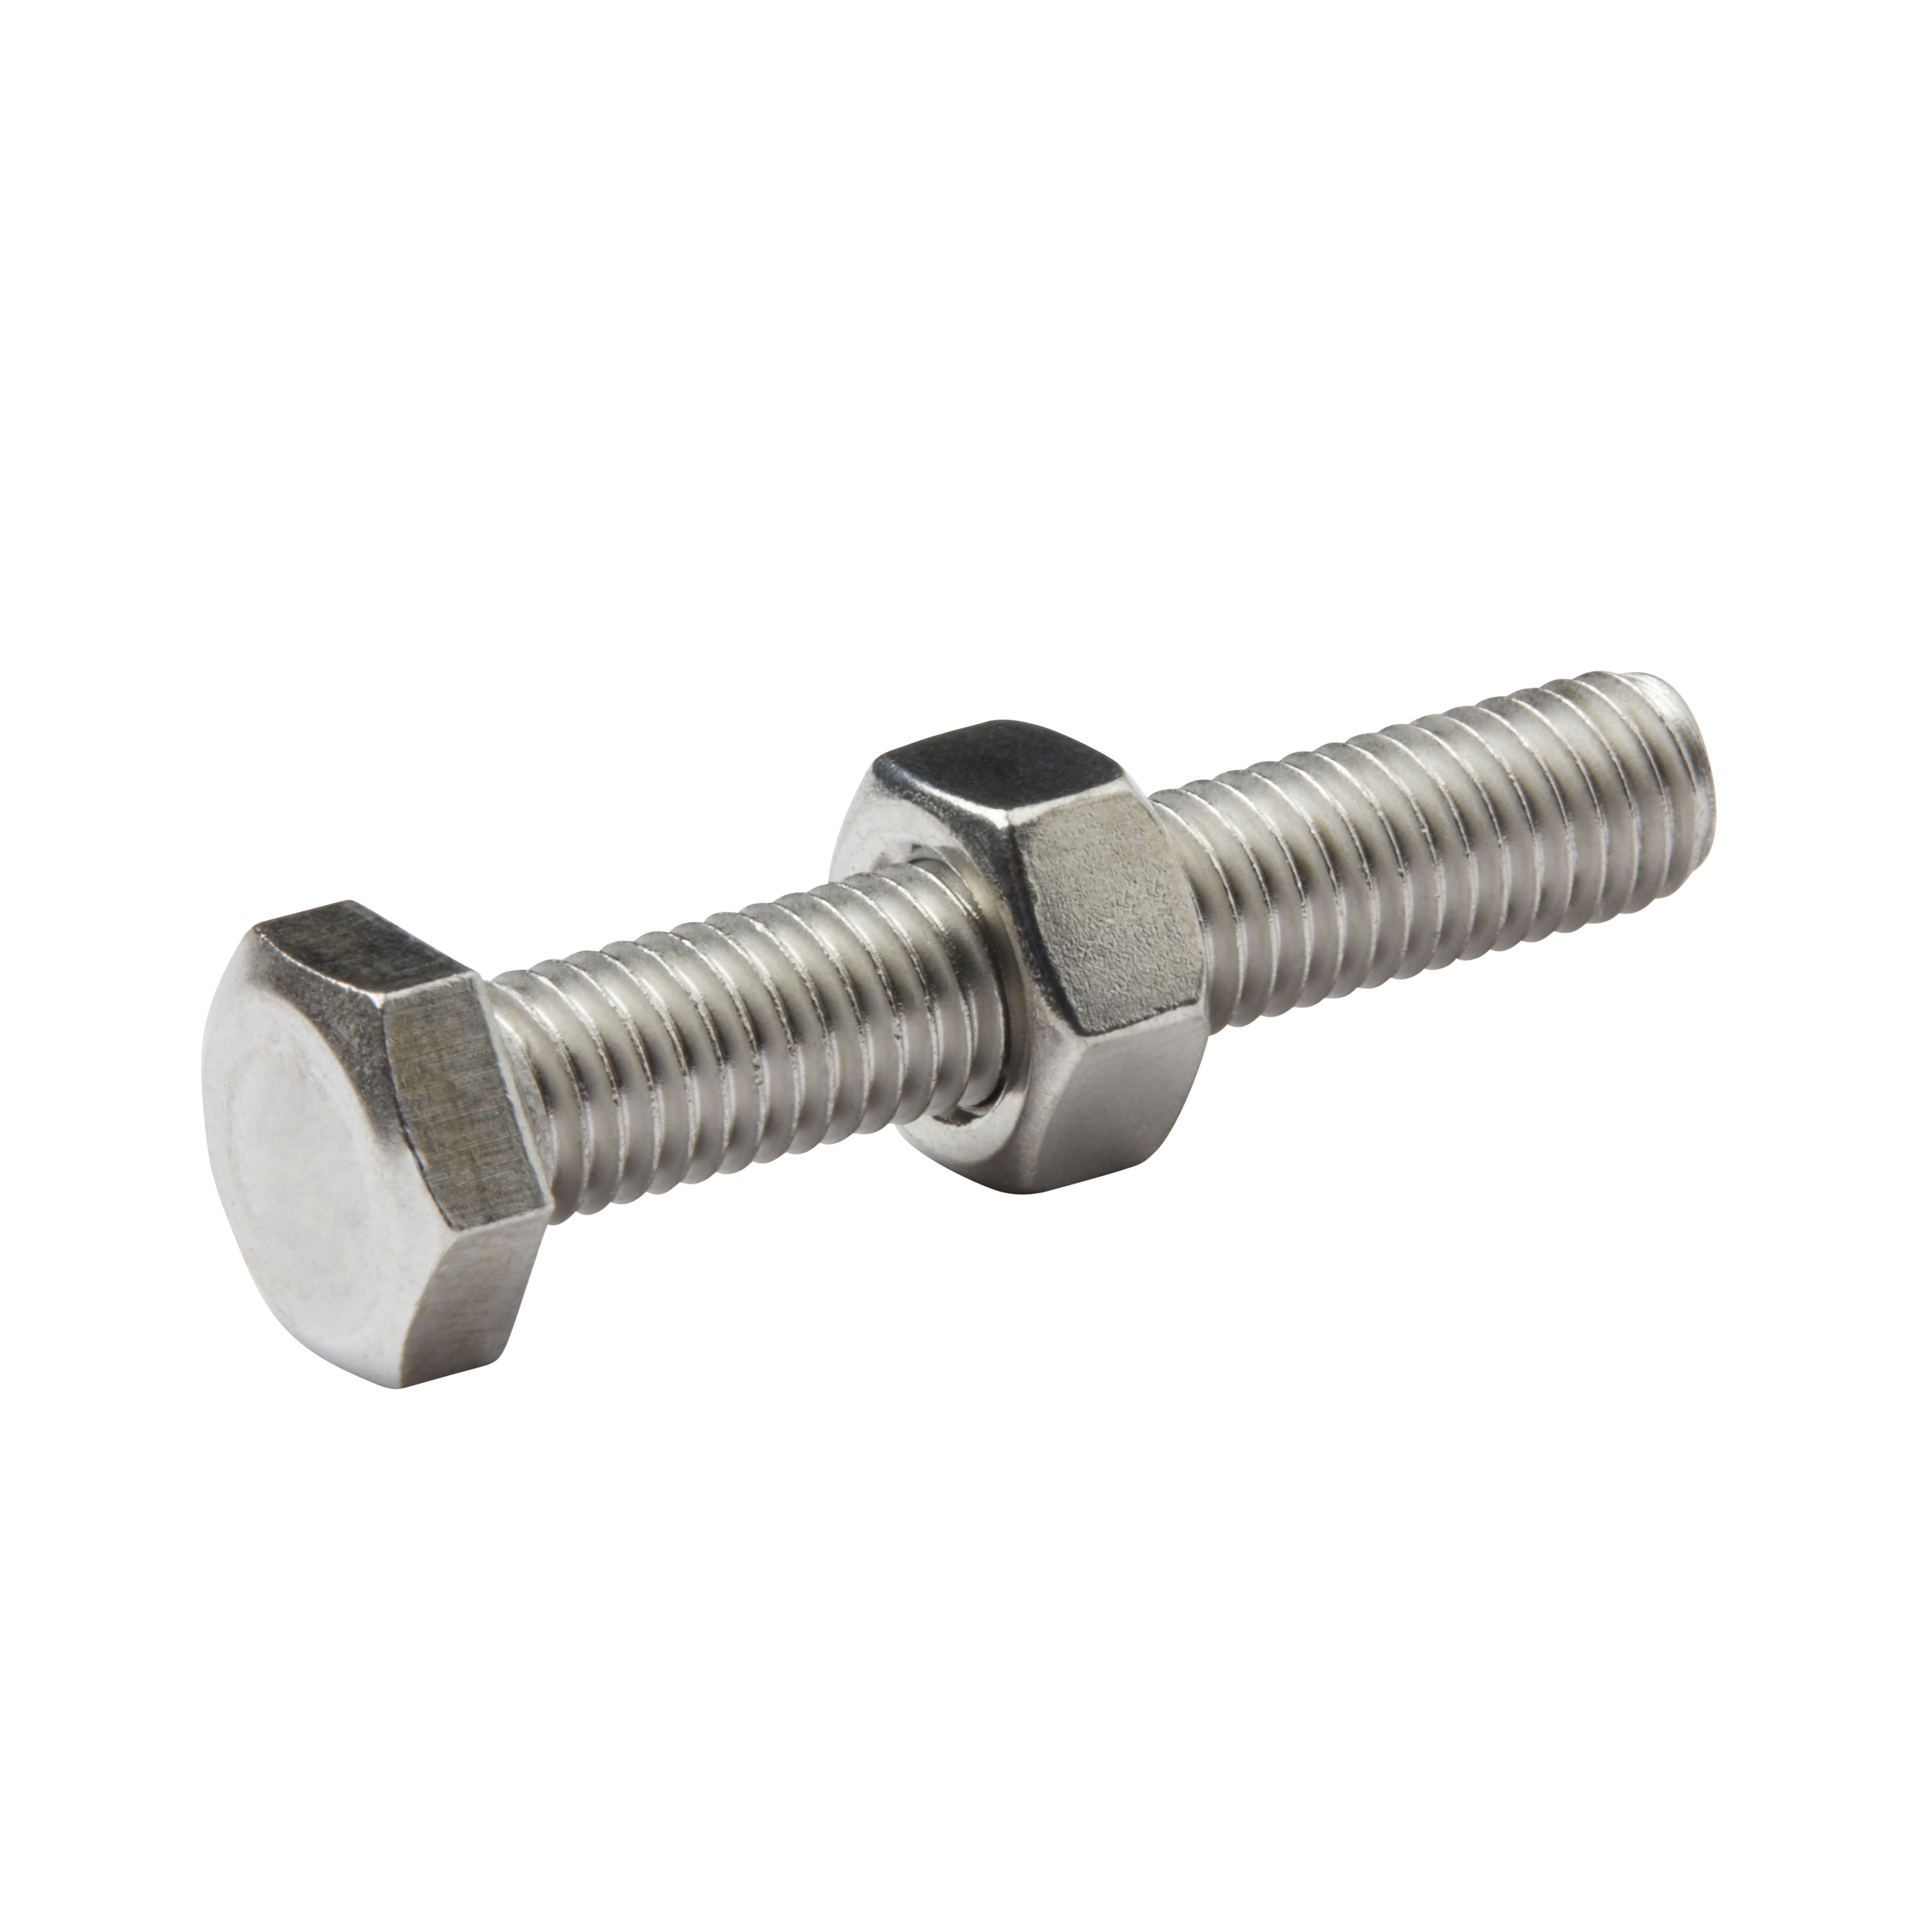 Diall M8 Hex Stainless steel Bolt & nut (L)45mm (Dia)8mm, Pack of 10